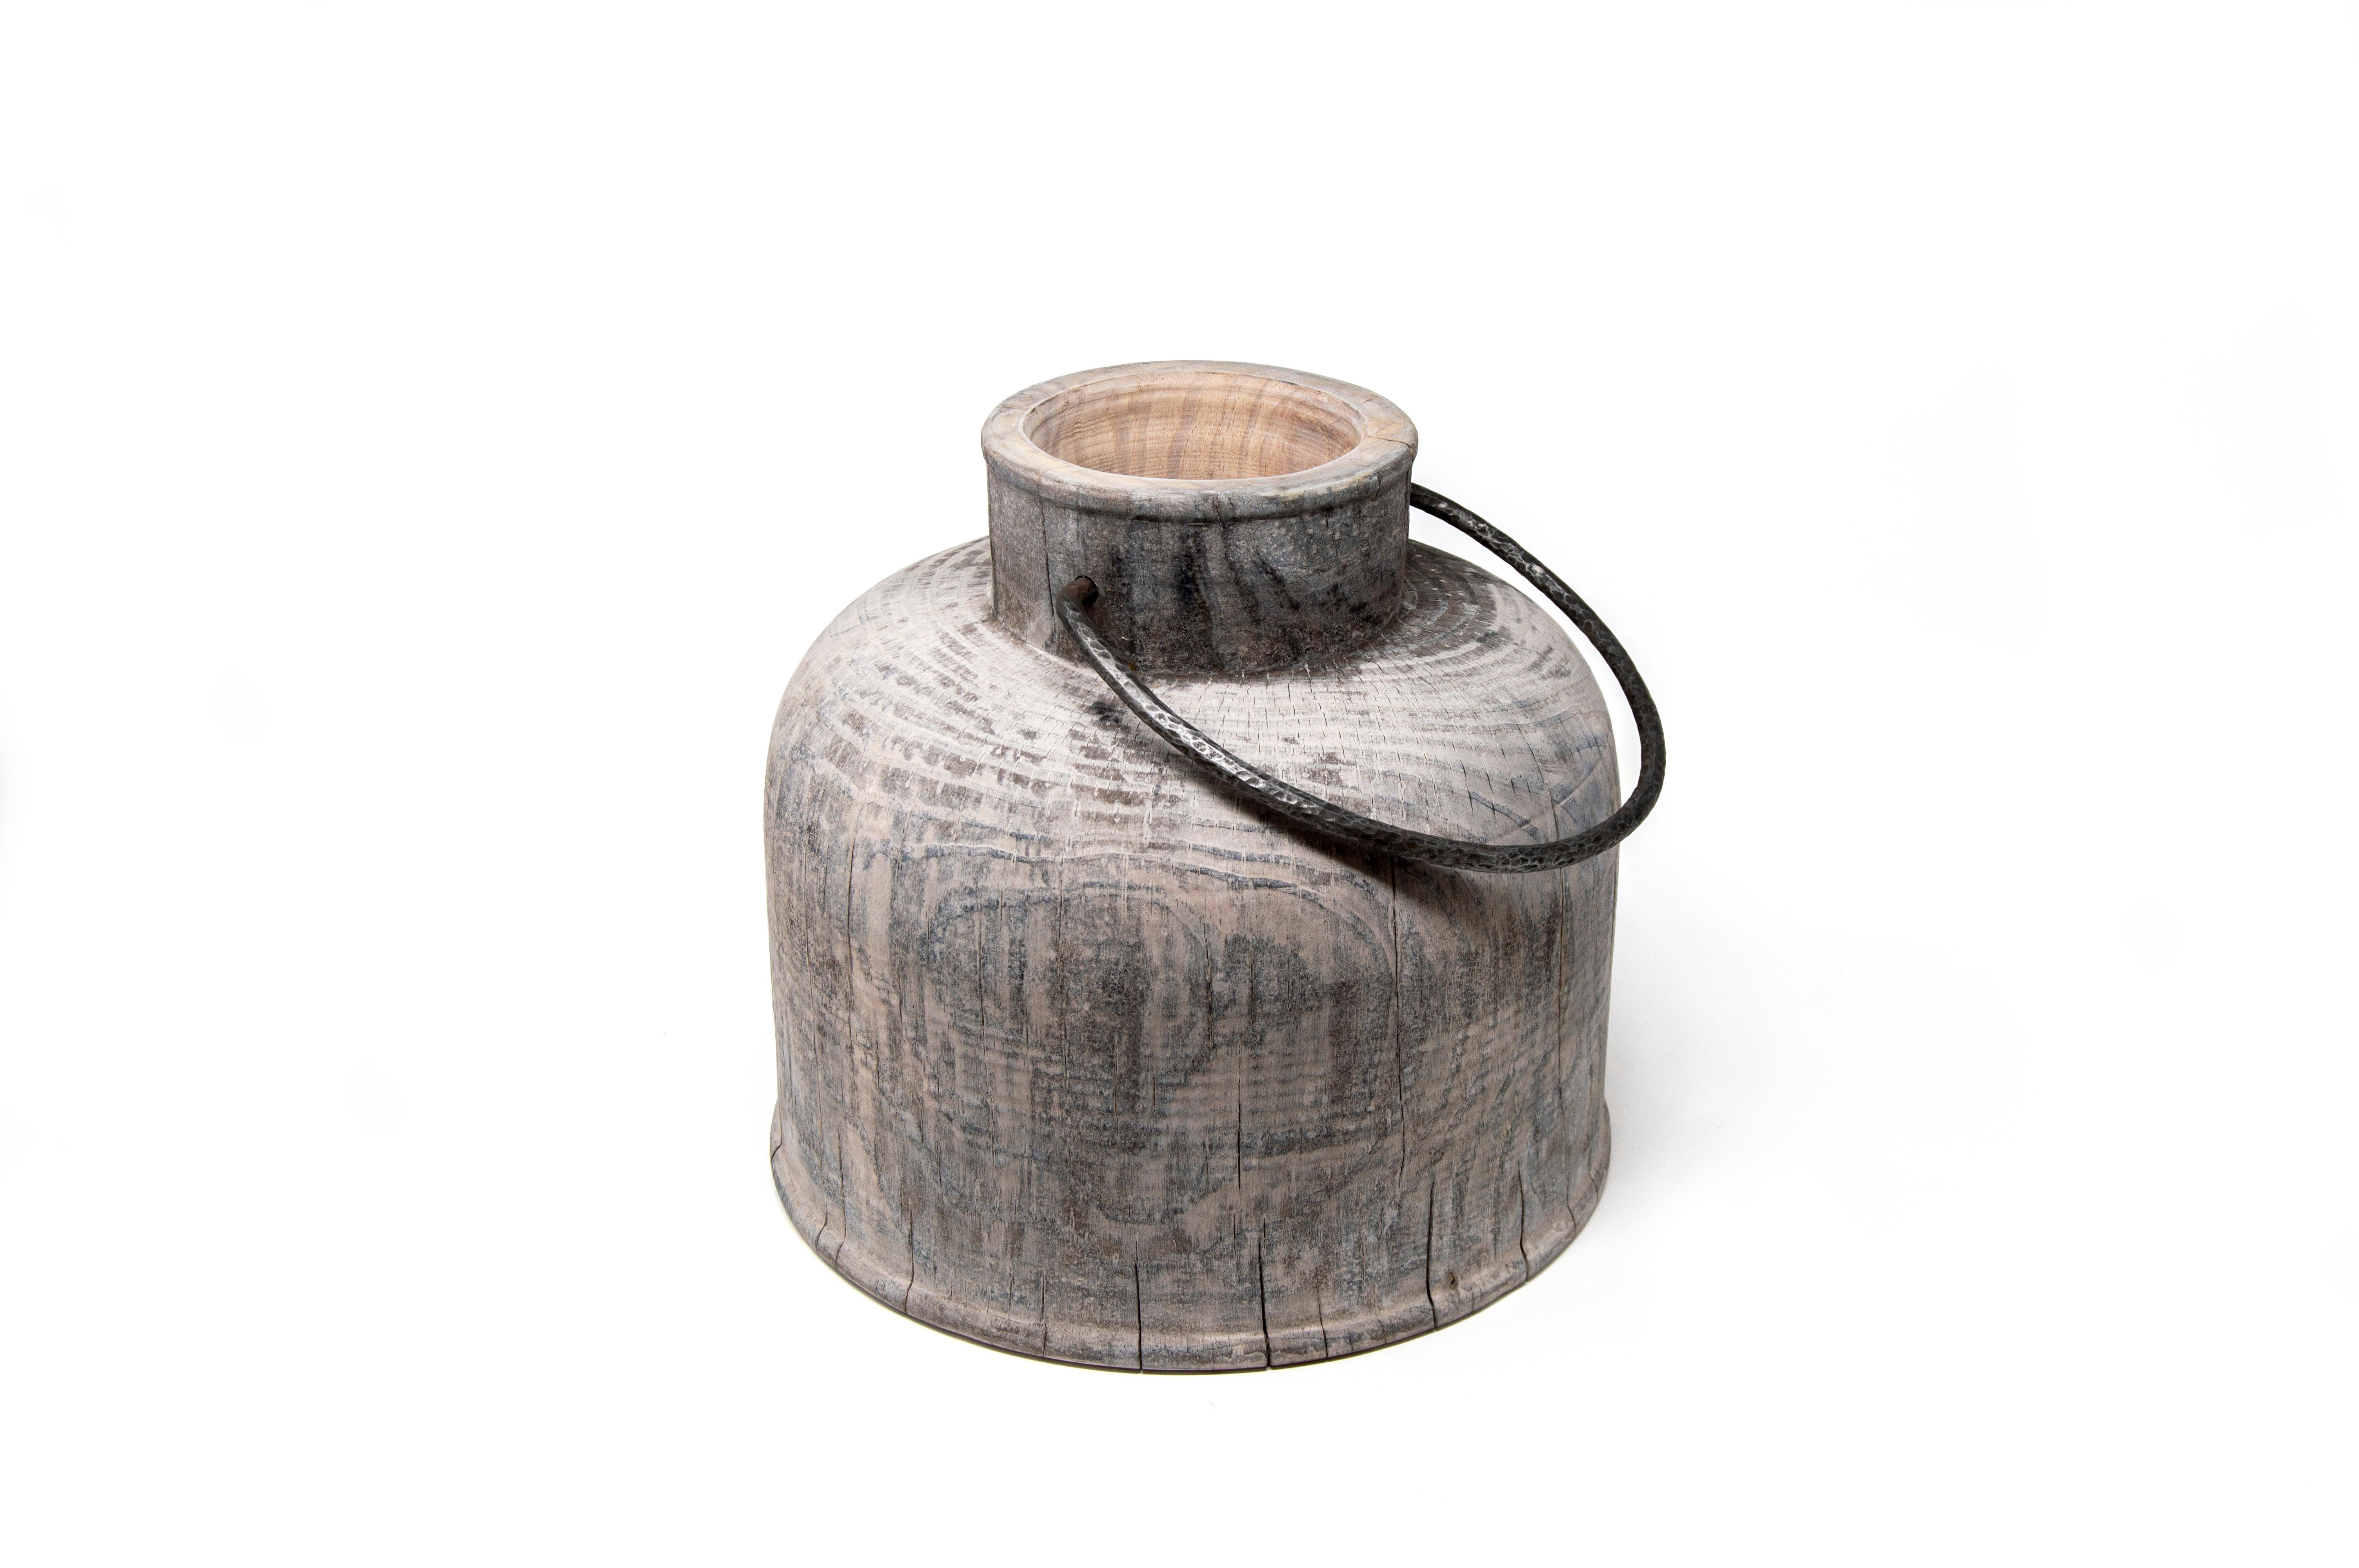 This pine wood vase is designed by the couple Setsu&Shinobu Ito and handmade by the artistic woodturner Lorenzo Franceschinis for Hands on Design. It is inspired by the ancient steel milk containers and the surface finish is made from titanium